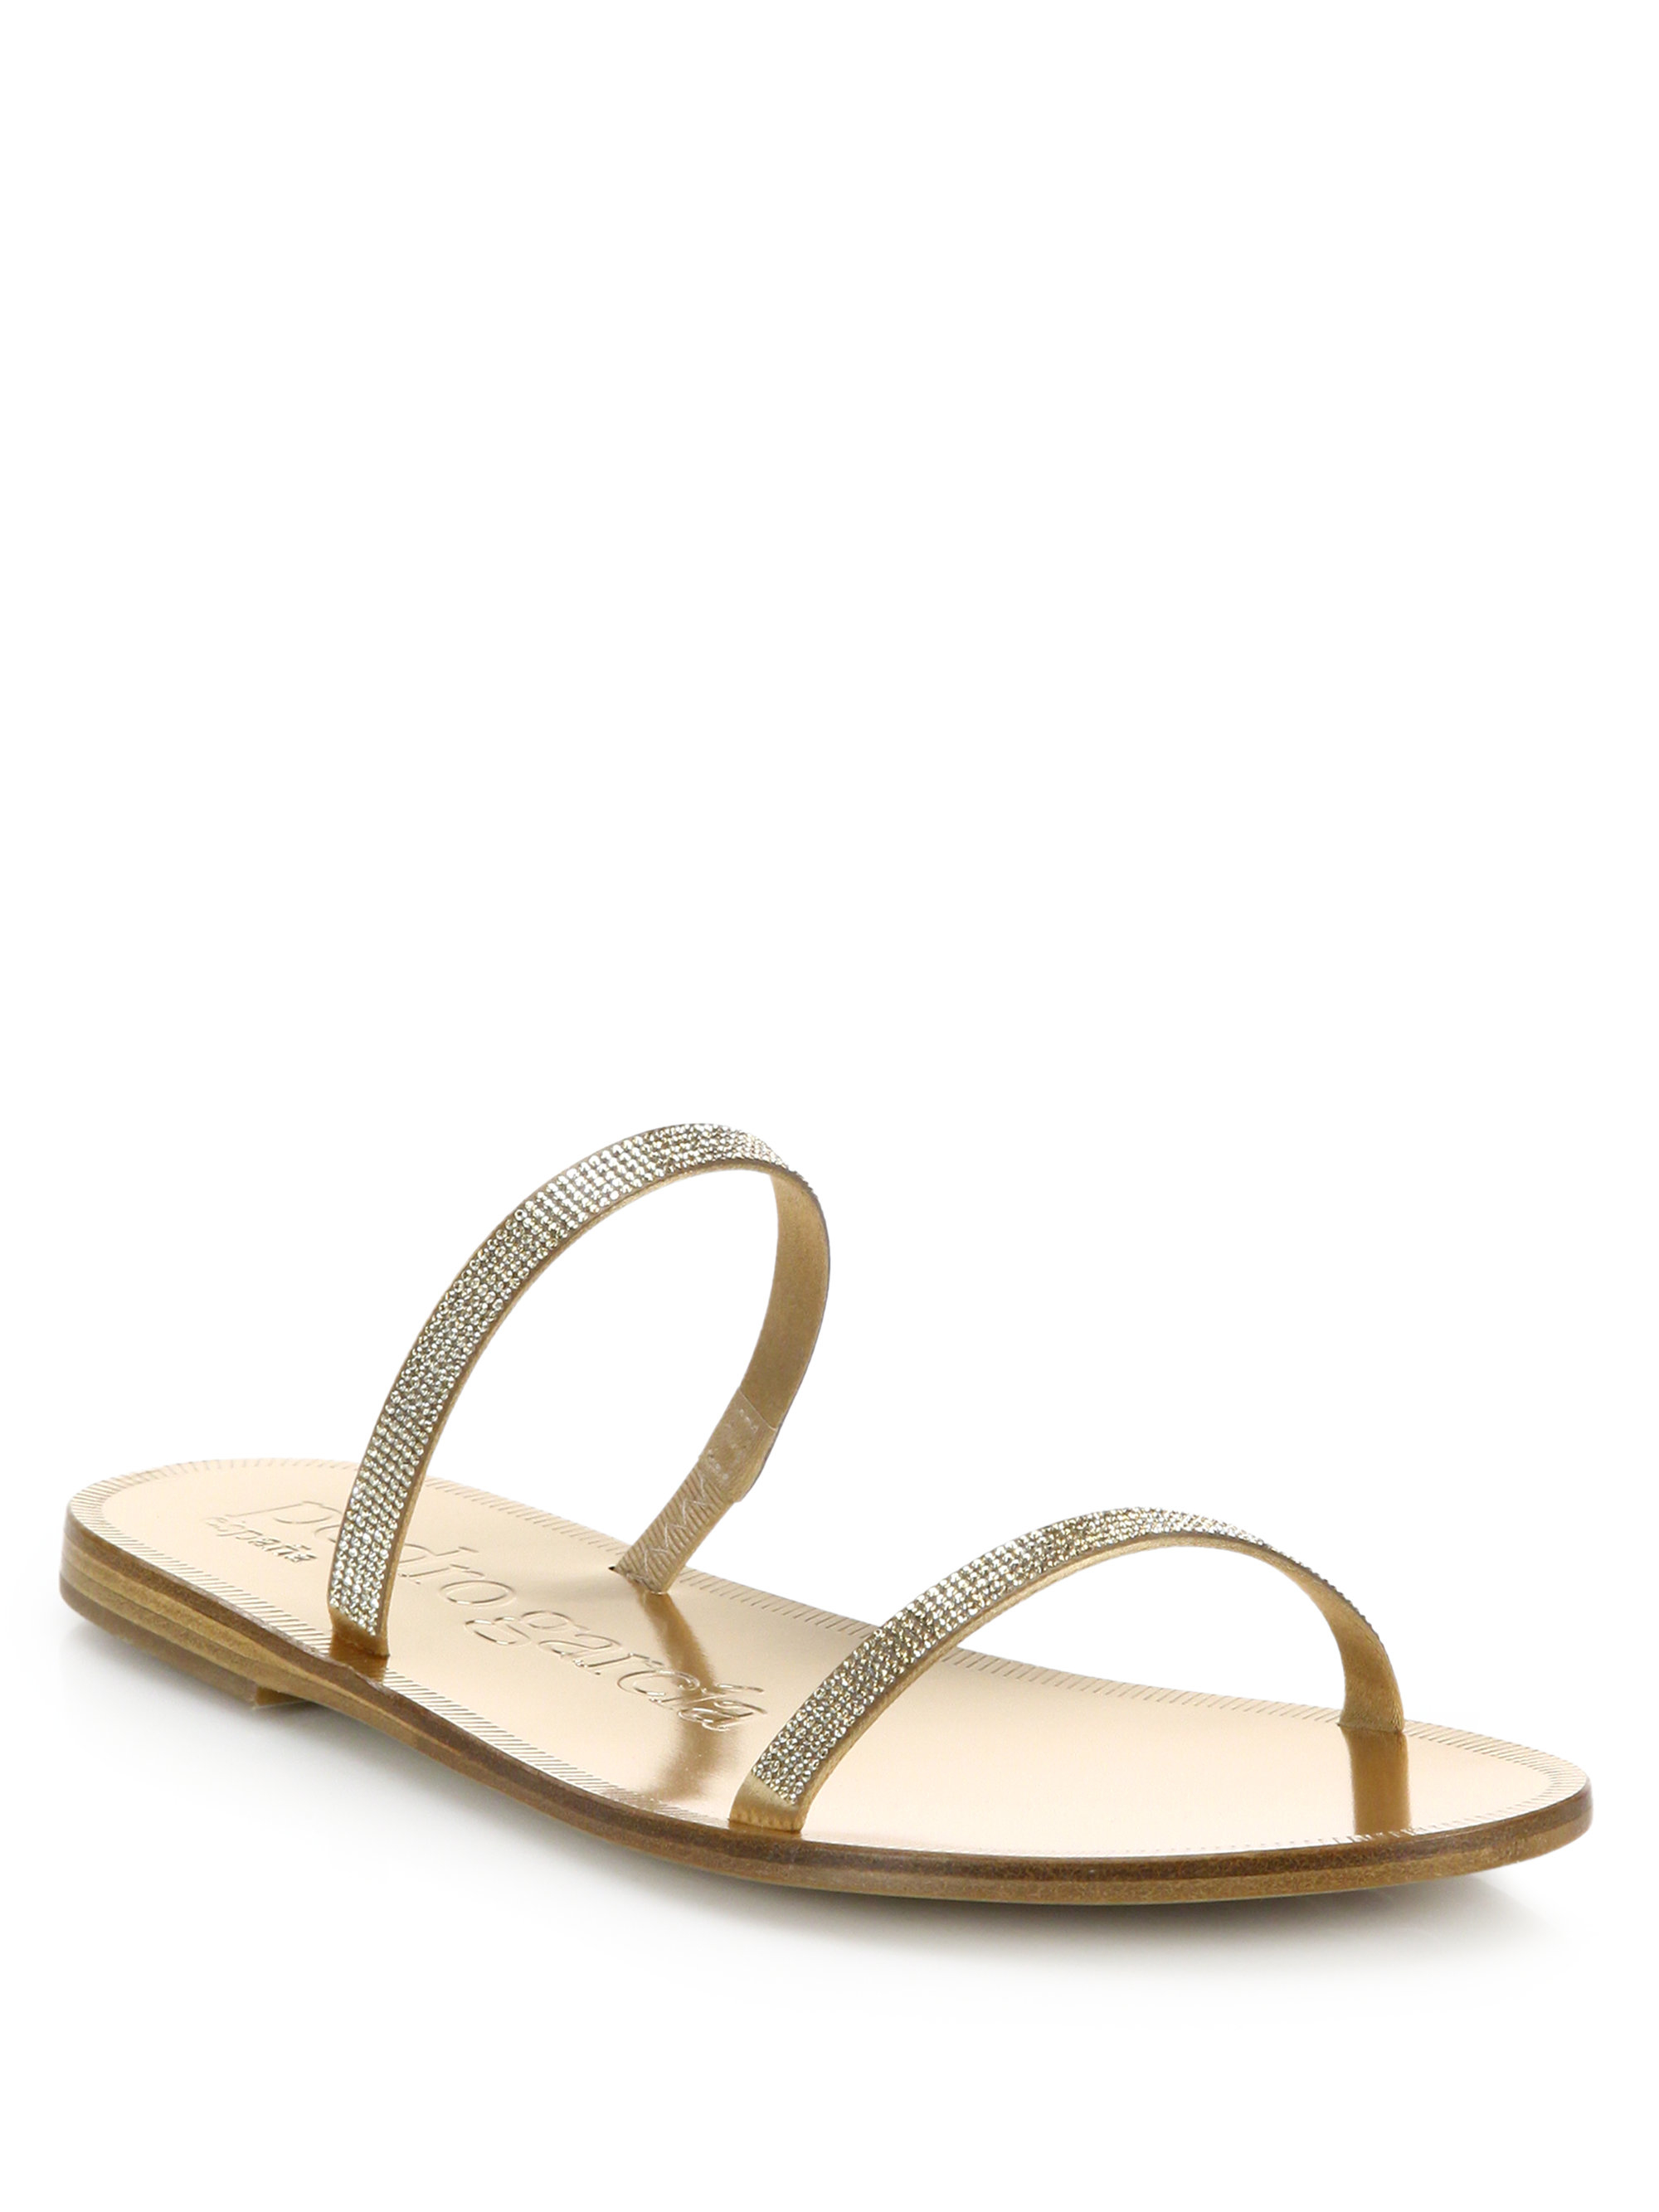 Pedro Garcia Irma Jeweled Satin Double-strap Sandals in Gold | Lyst